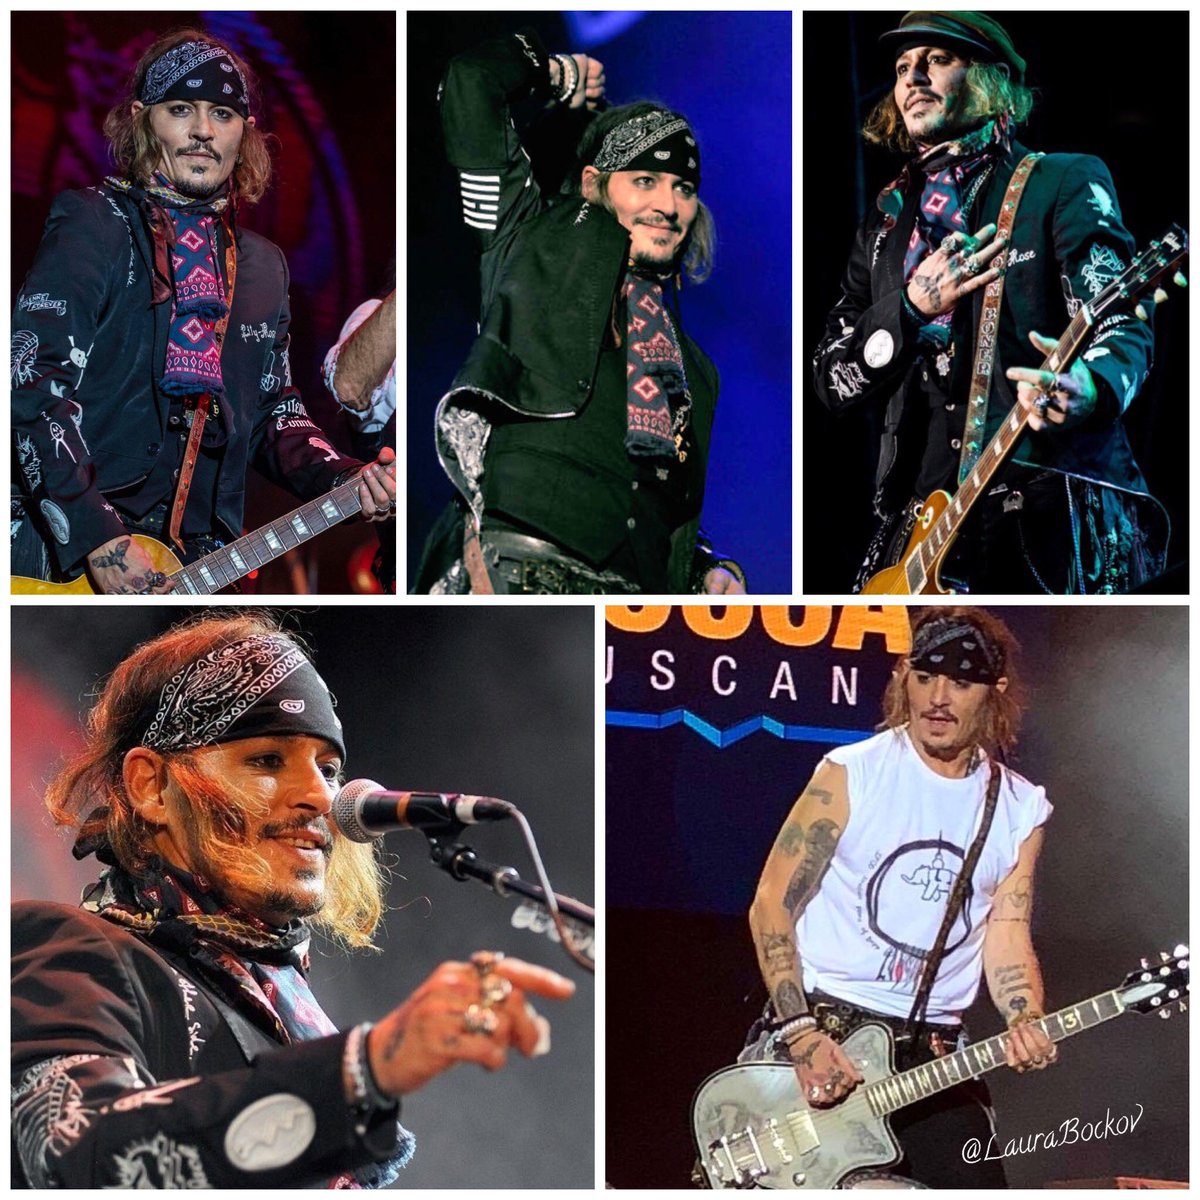 Part 8: Johnny Depp first love has been music. Here is a thread celebrating the  @hollywoodvamps tours (In No Particular Order) 8...  #JusticeForJohnnyDepp  #HappyJohnnyDeppDay